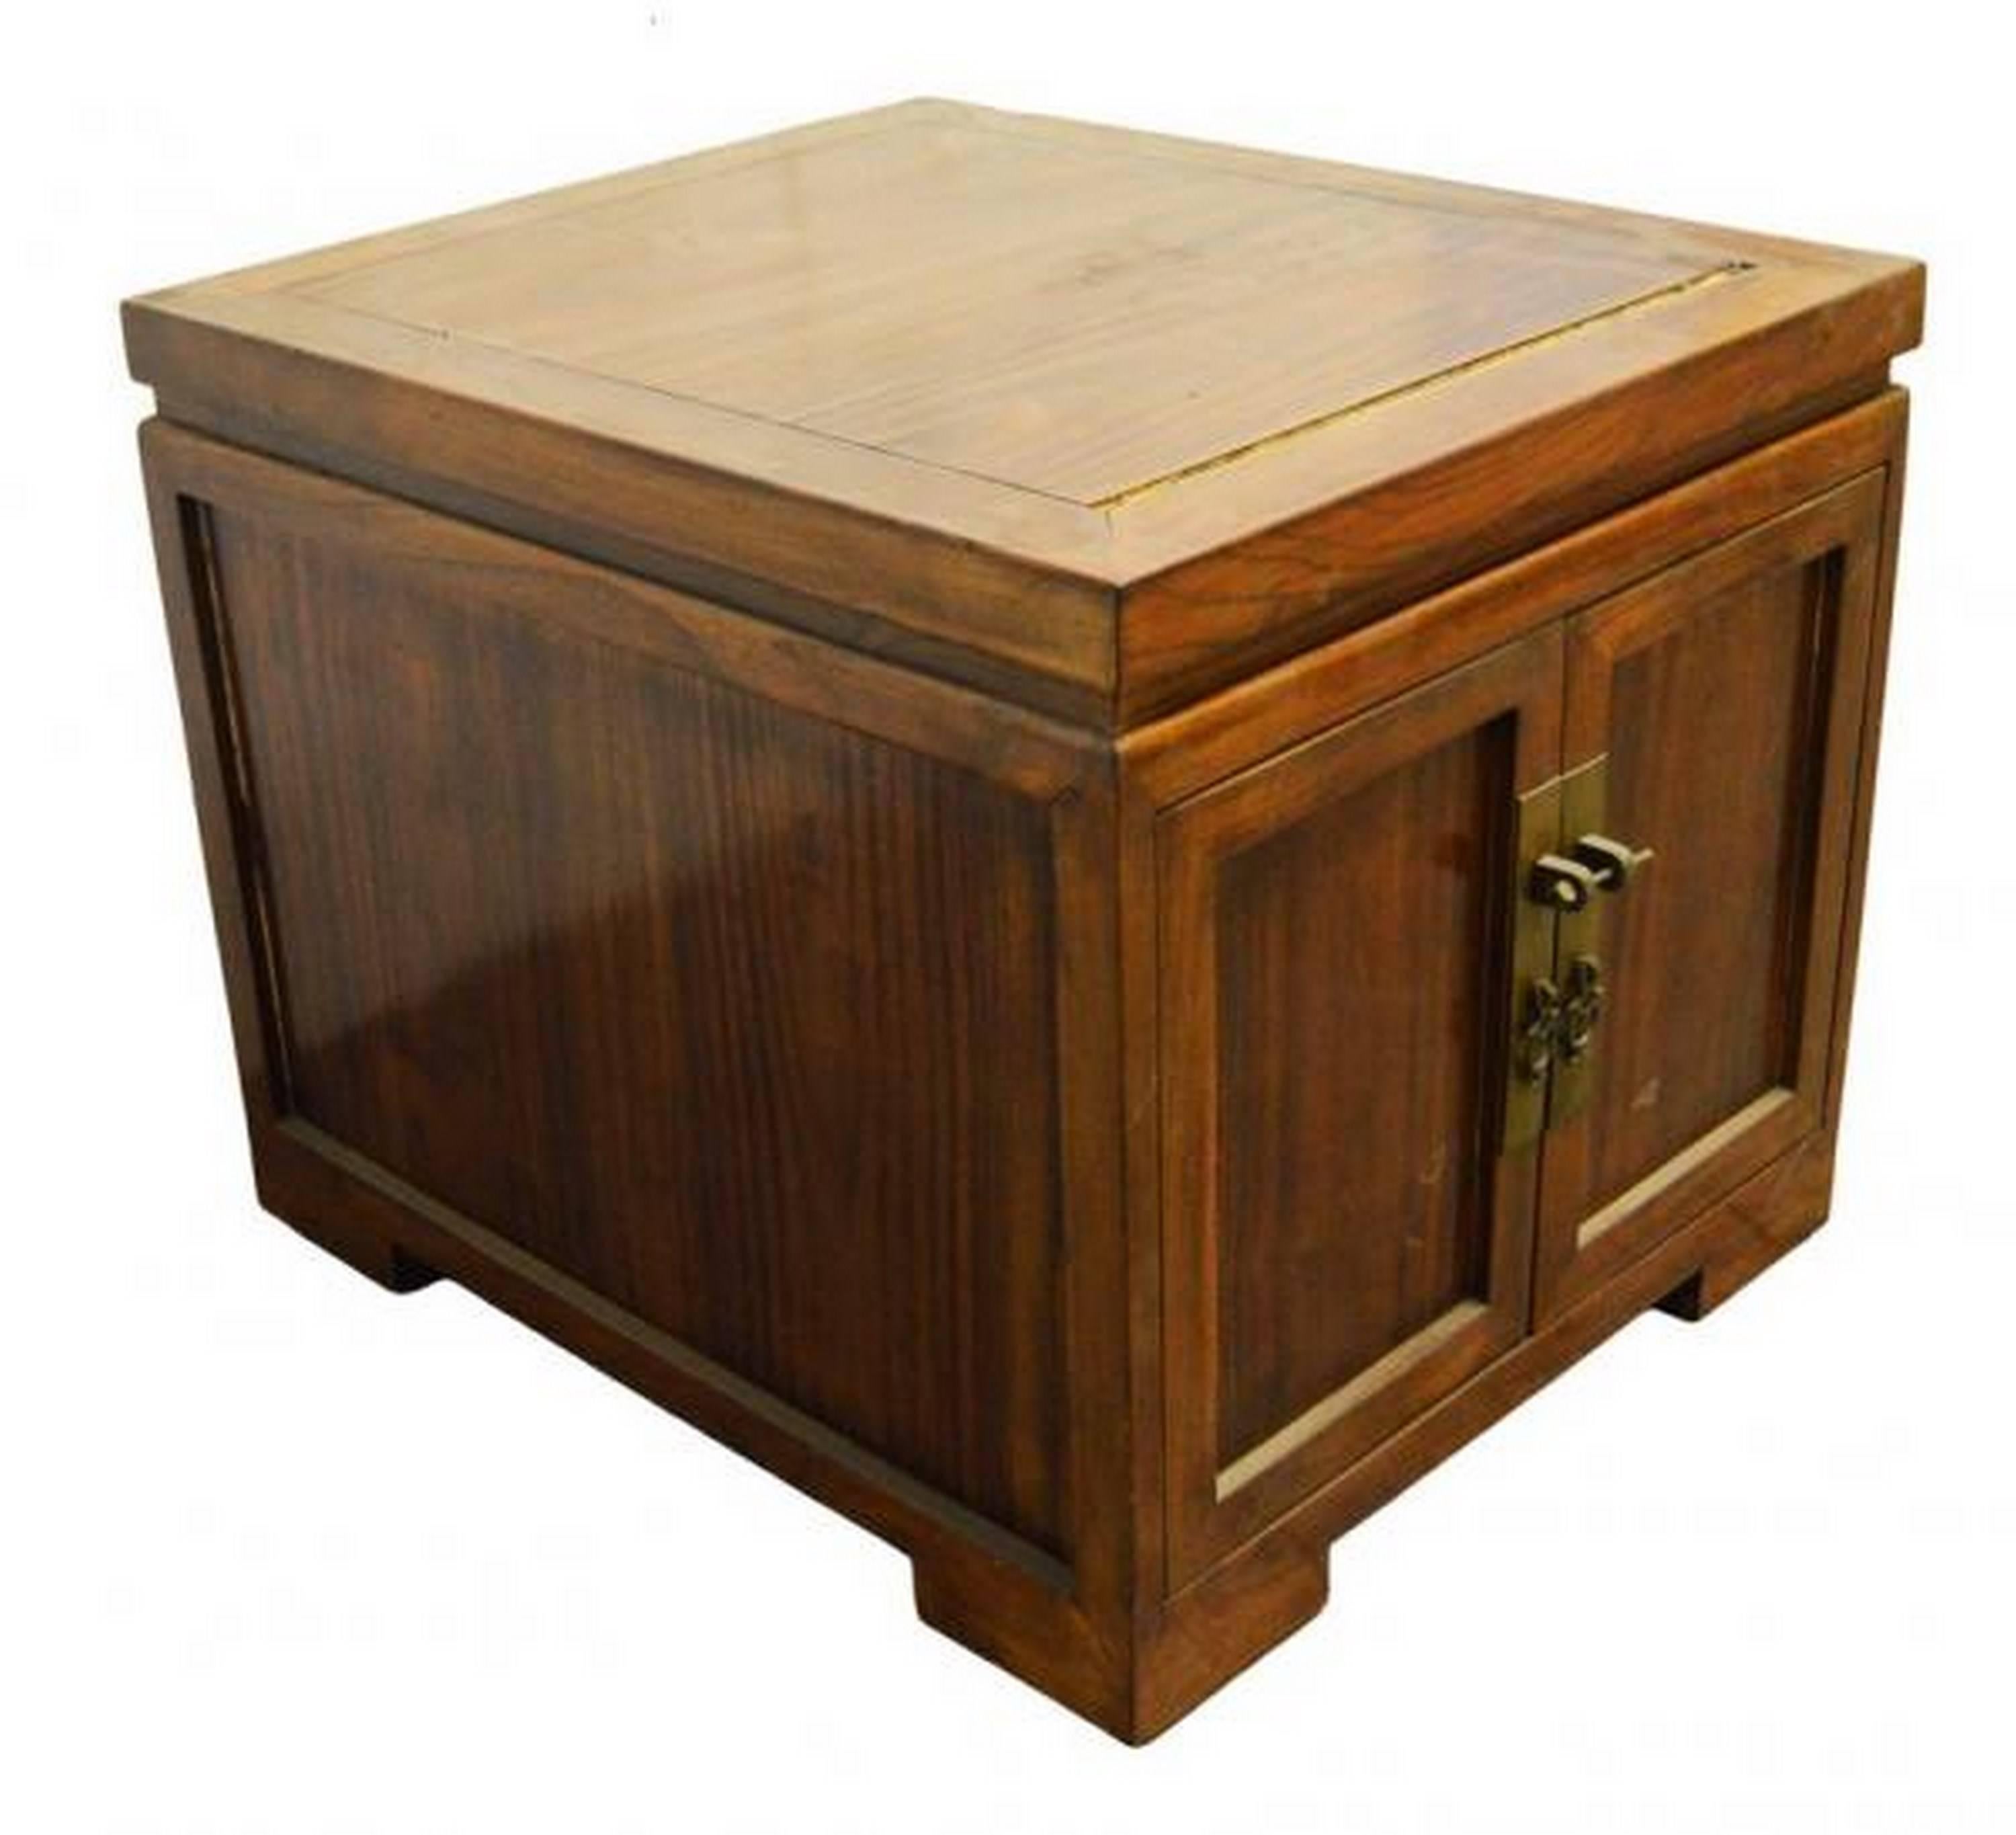 A brown lacquered Chinese bedside cabinet with traditional brass hardware and doors from the the early 20th century. This bedside cabinet features two doors that open via simple brass ring pulls and lock via a traditional brass lockset. The doors